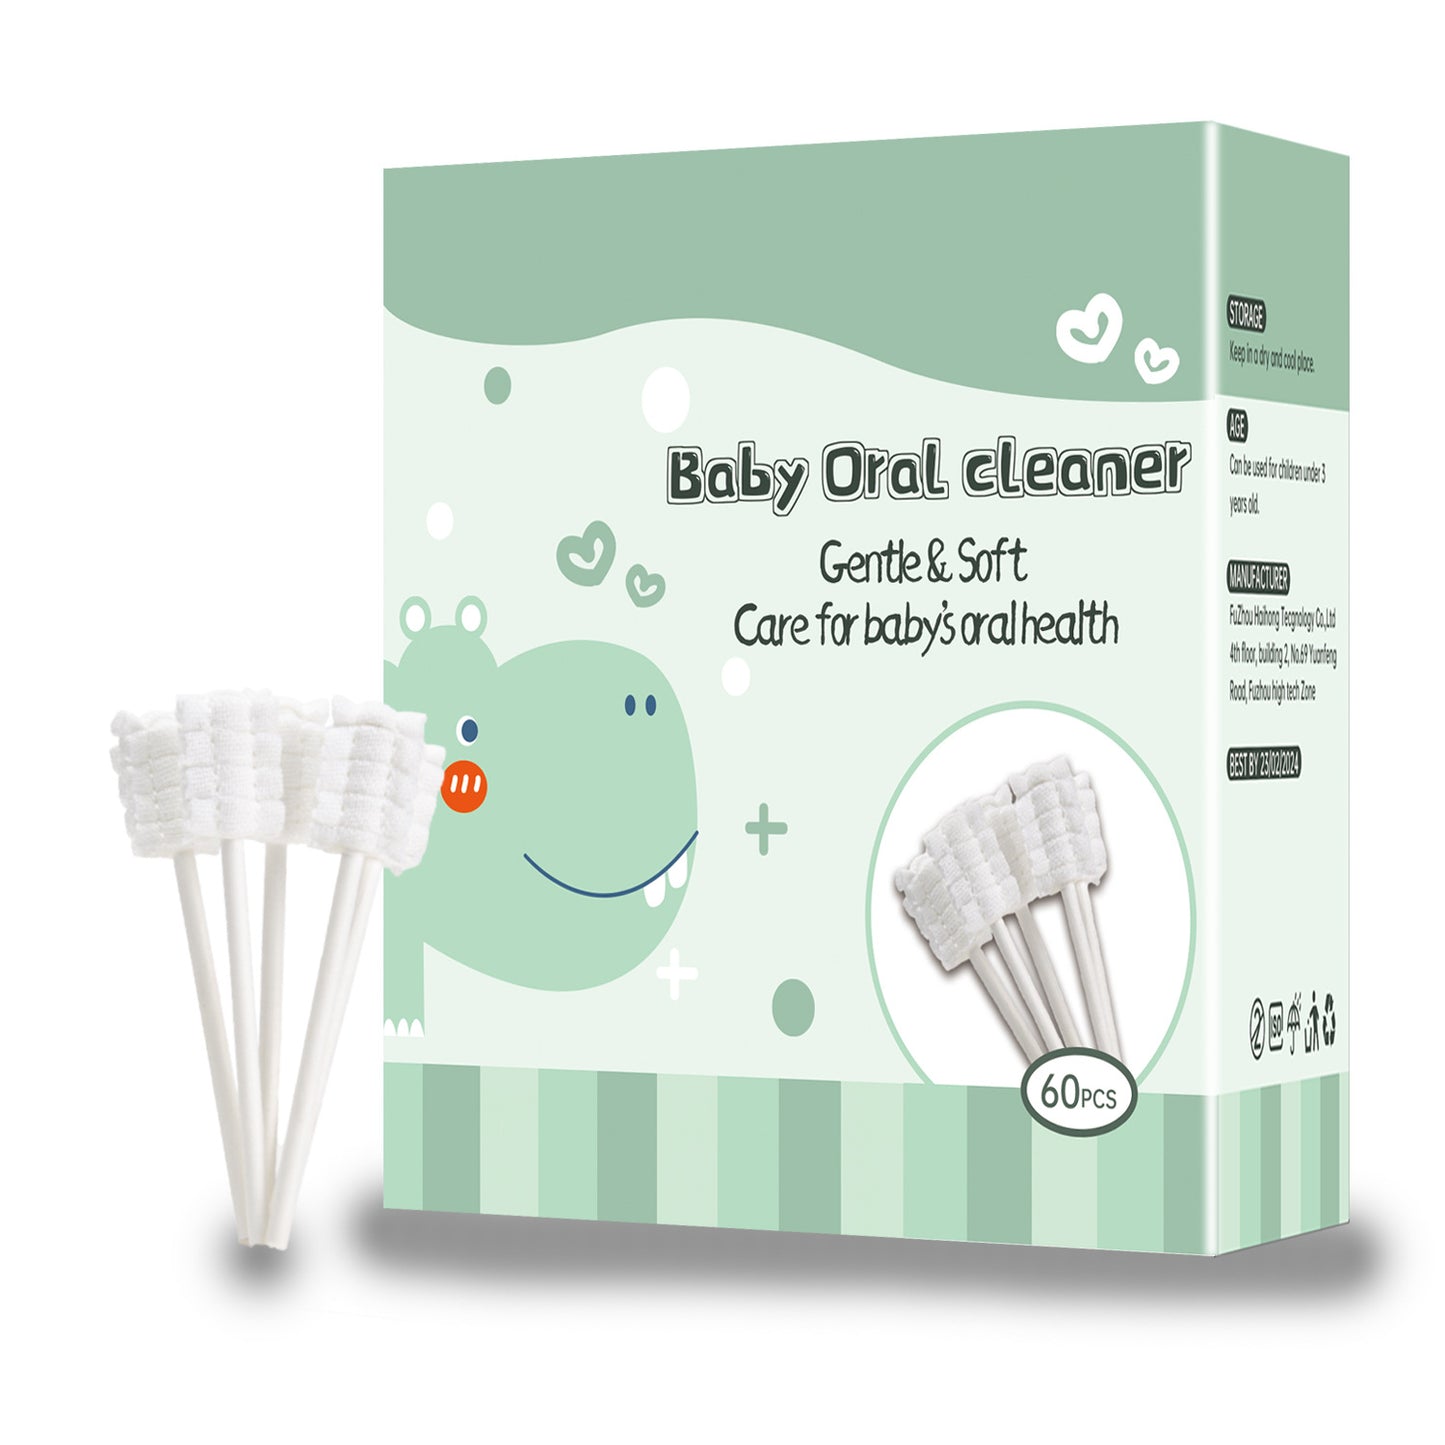 Baby Oral Cleaner (60pcs)